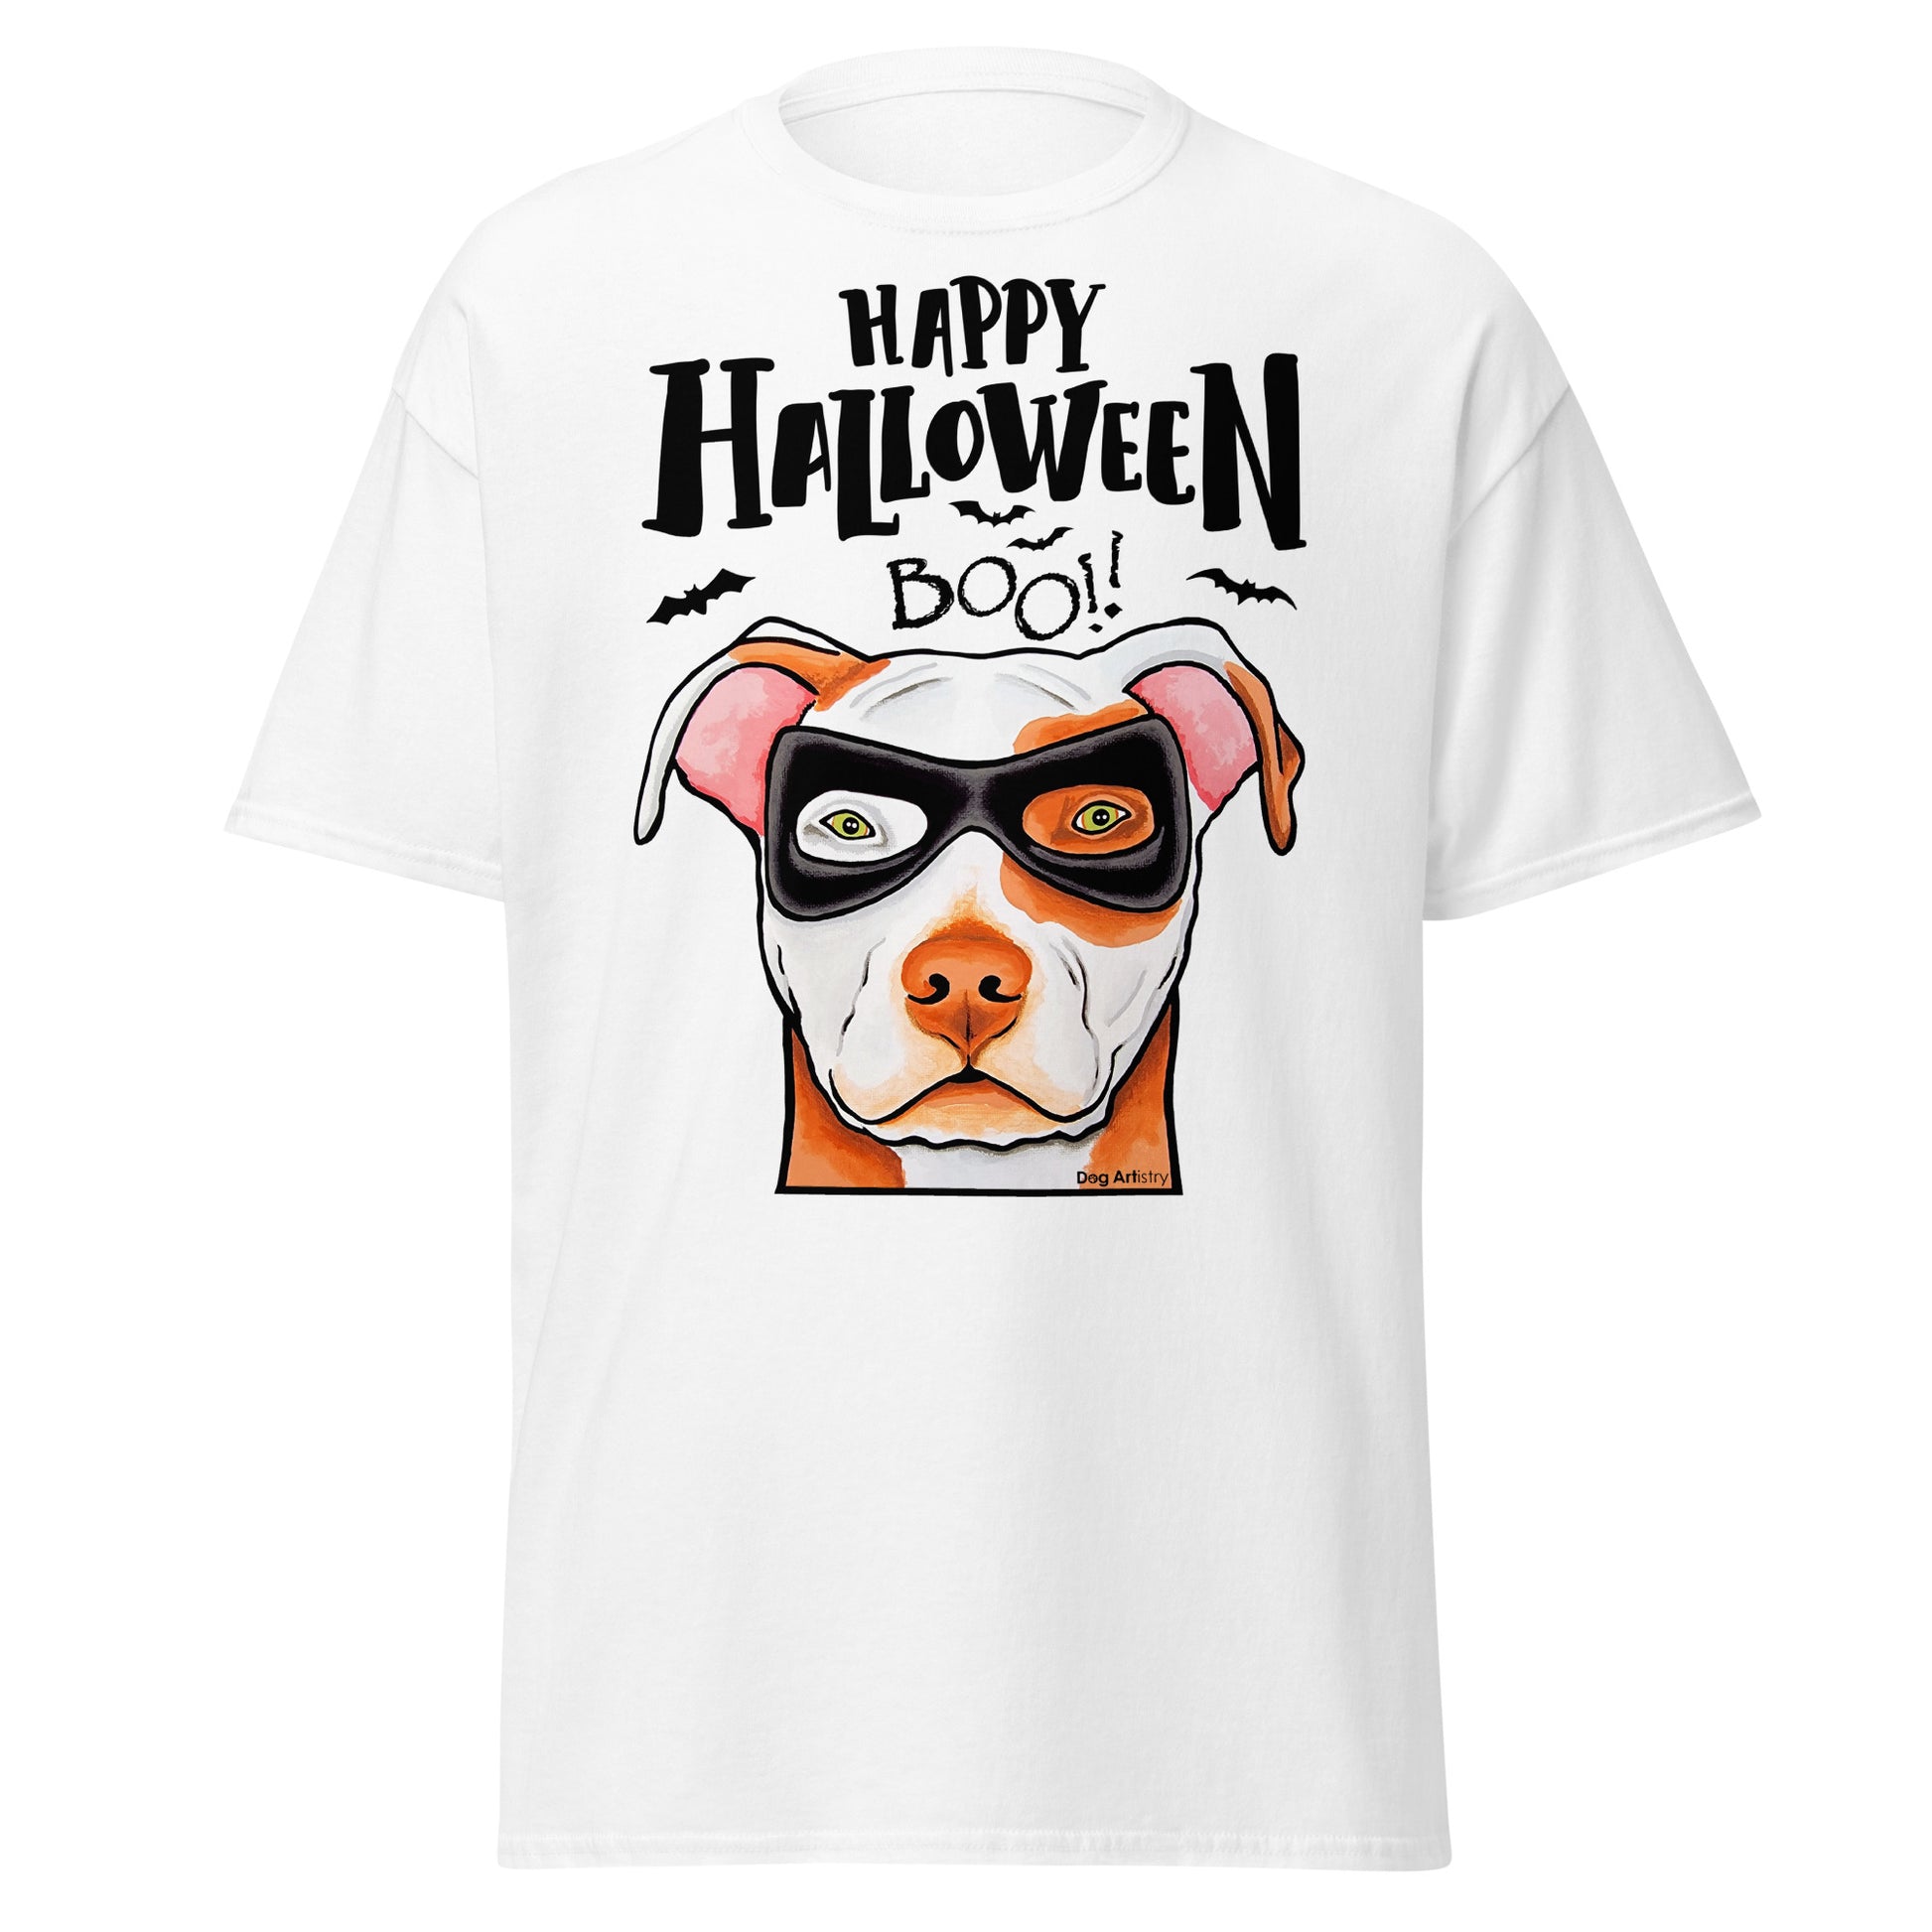 Funny Happy Halloween American Pit Bull wearing mask men’s white t-shirt by Dog Artistry.